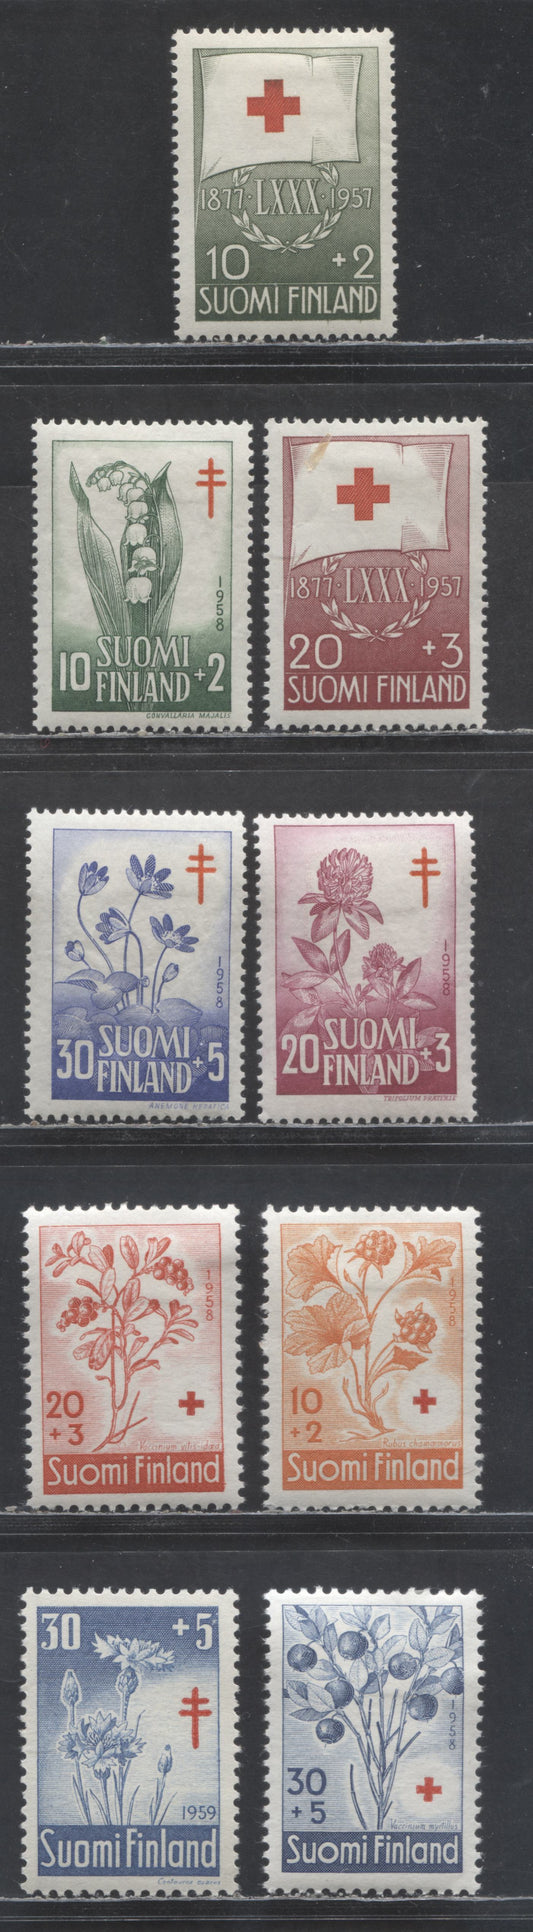 Lot 420 Finland SC#B145/B156 1957-1959 Semi Postals, 9 VFOG & NH Singles, Click on Listing to See ALL Pictures, Estimated Value $14